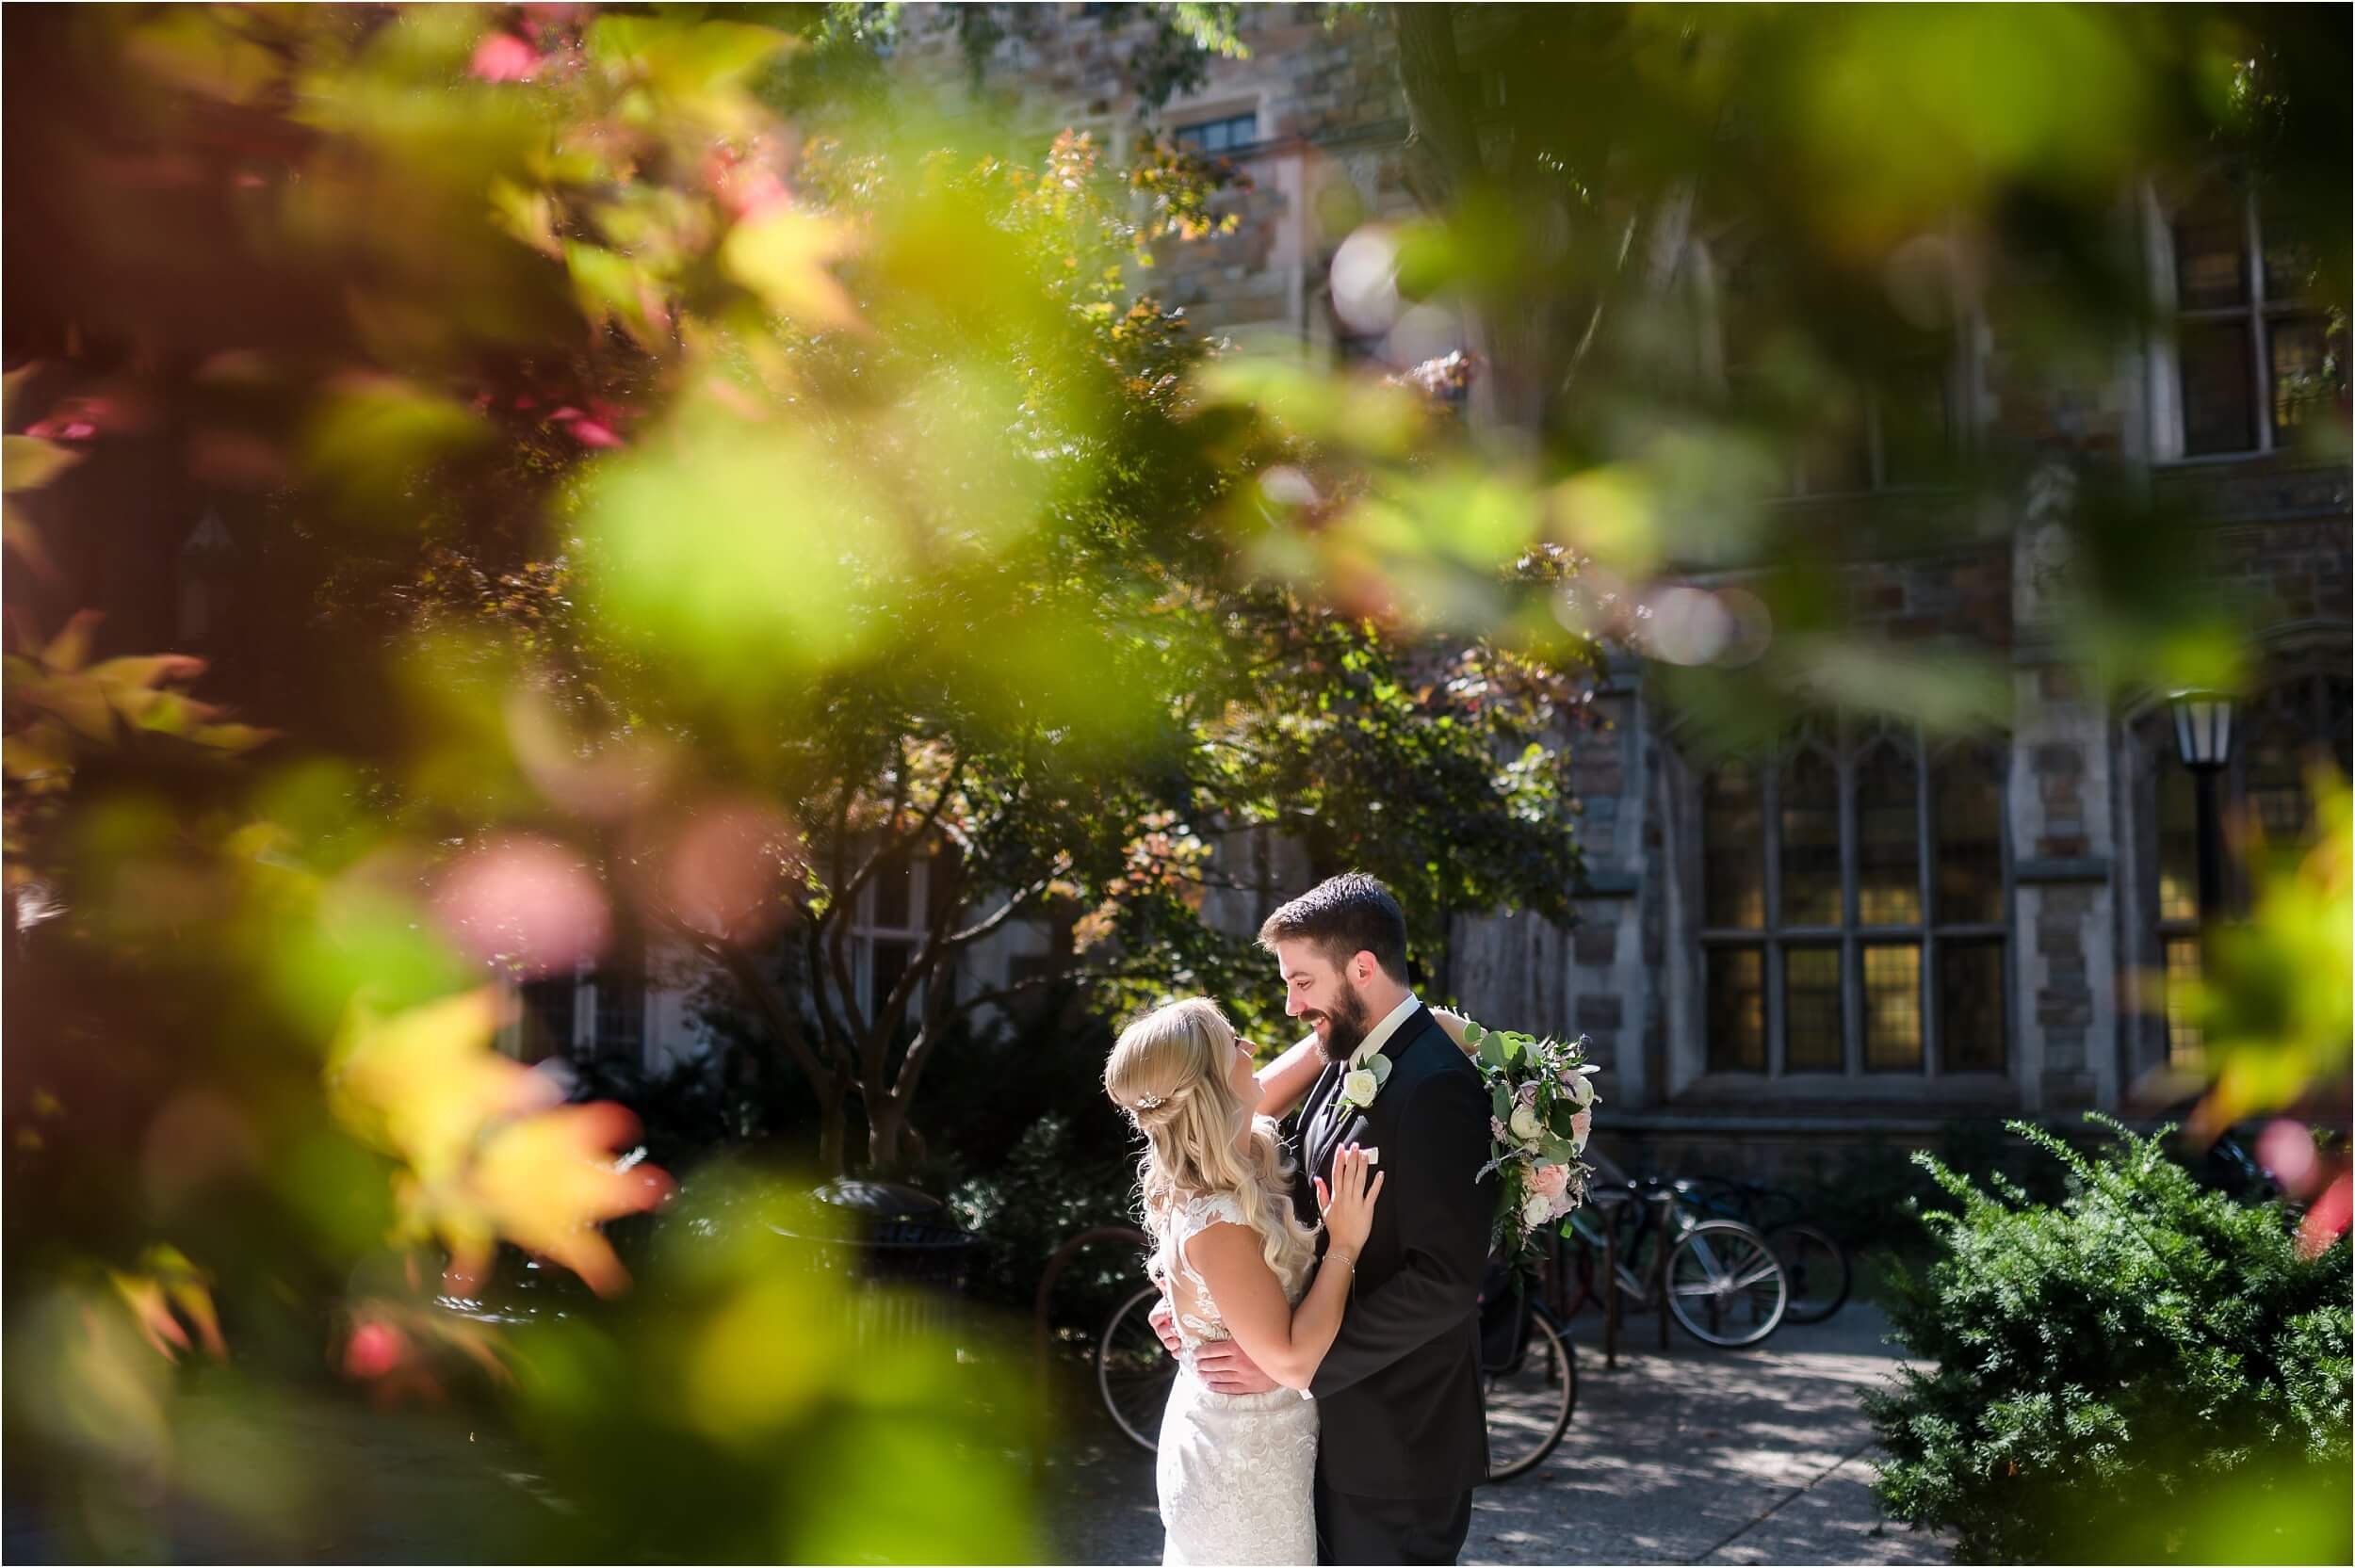  A couple embraces at the U of M law quad during their wedding photos.  